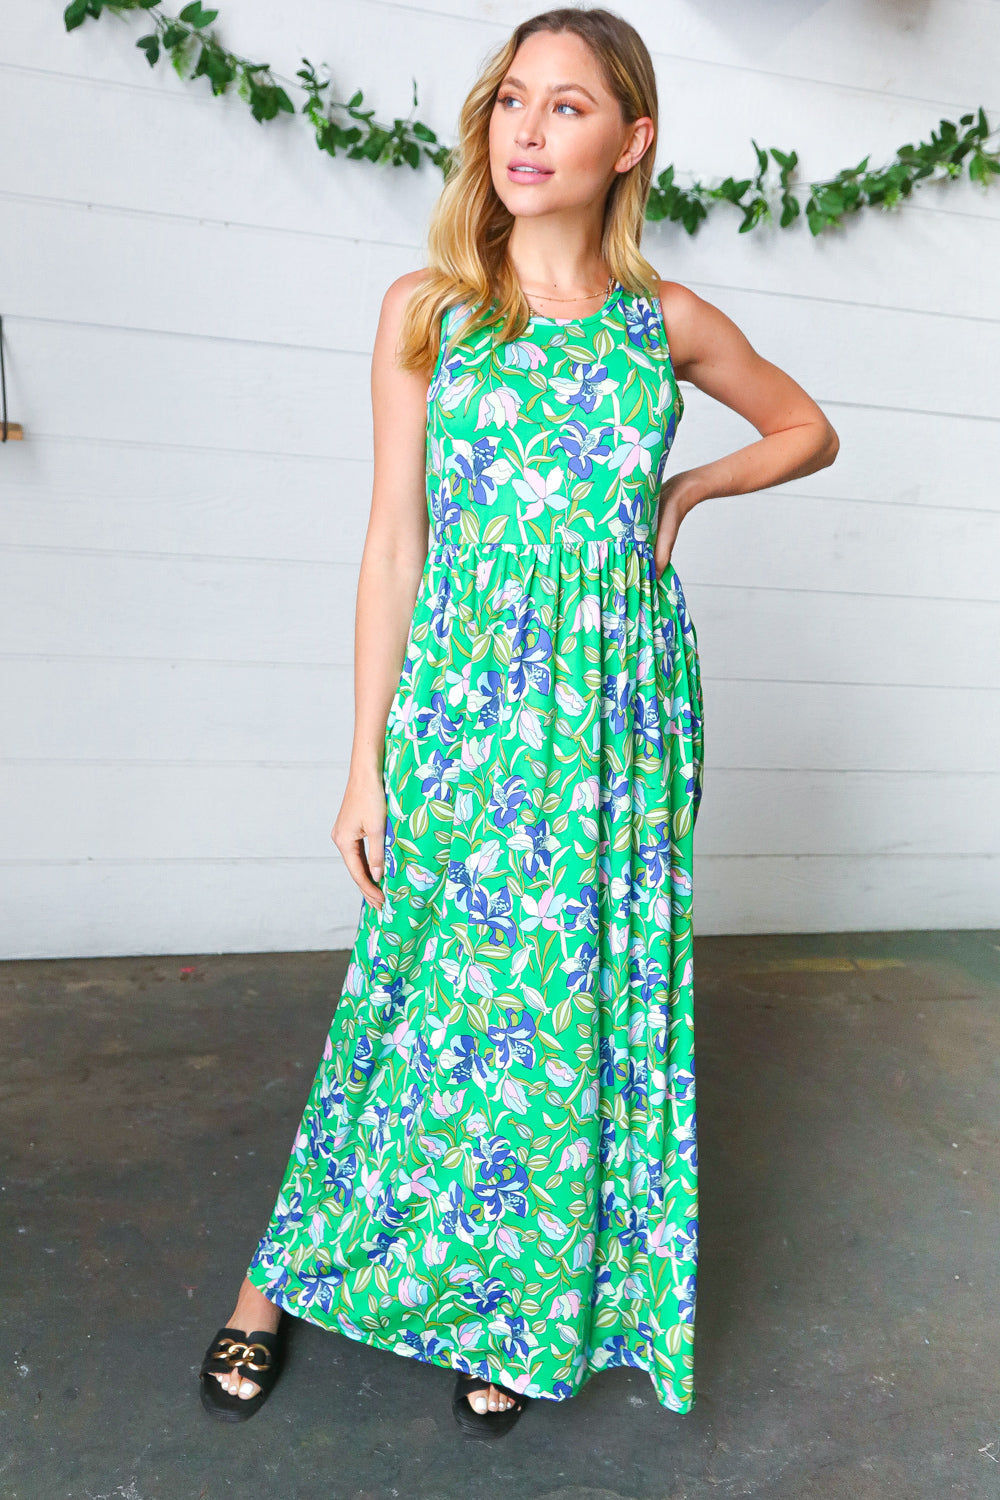 Green & Blue Floral Print Fit and Flare Maxi Dress